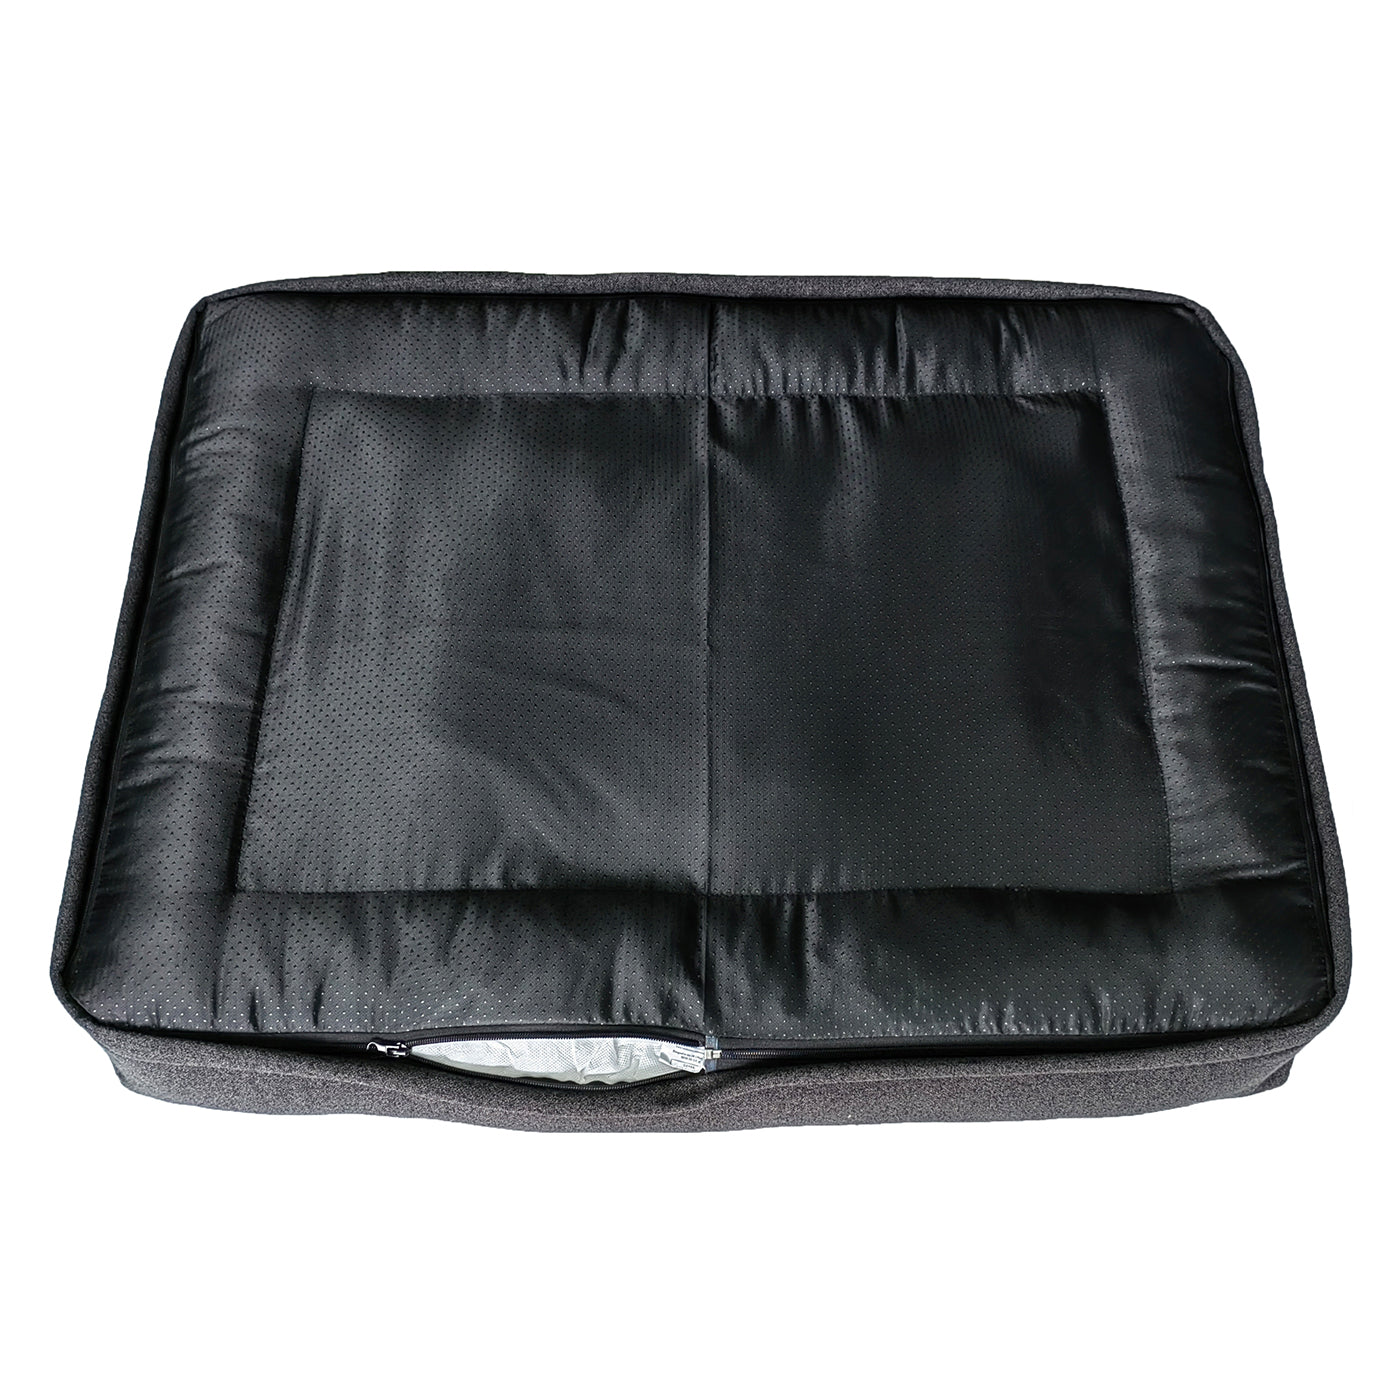 Discover Our Luxurious Comfort Cube Dog Bed in Anthracite (Navy), featuring Removable covers for easy machine washing and a non slip wipeable base. This super soft pet bed offers the ultimate comfort to your furry friend! Bringing Your Canine Companion The Perfect Bed For Dogs To Curl Up To! Available Now at Lords & Labradors US